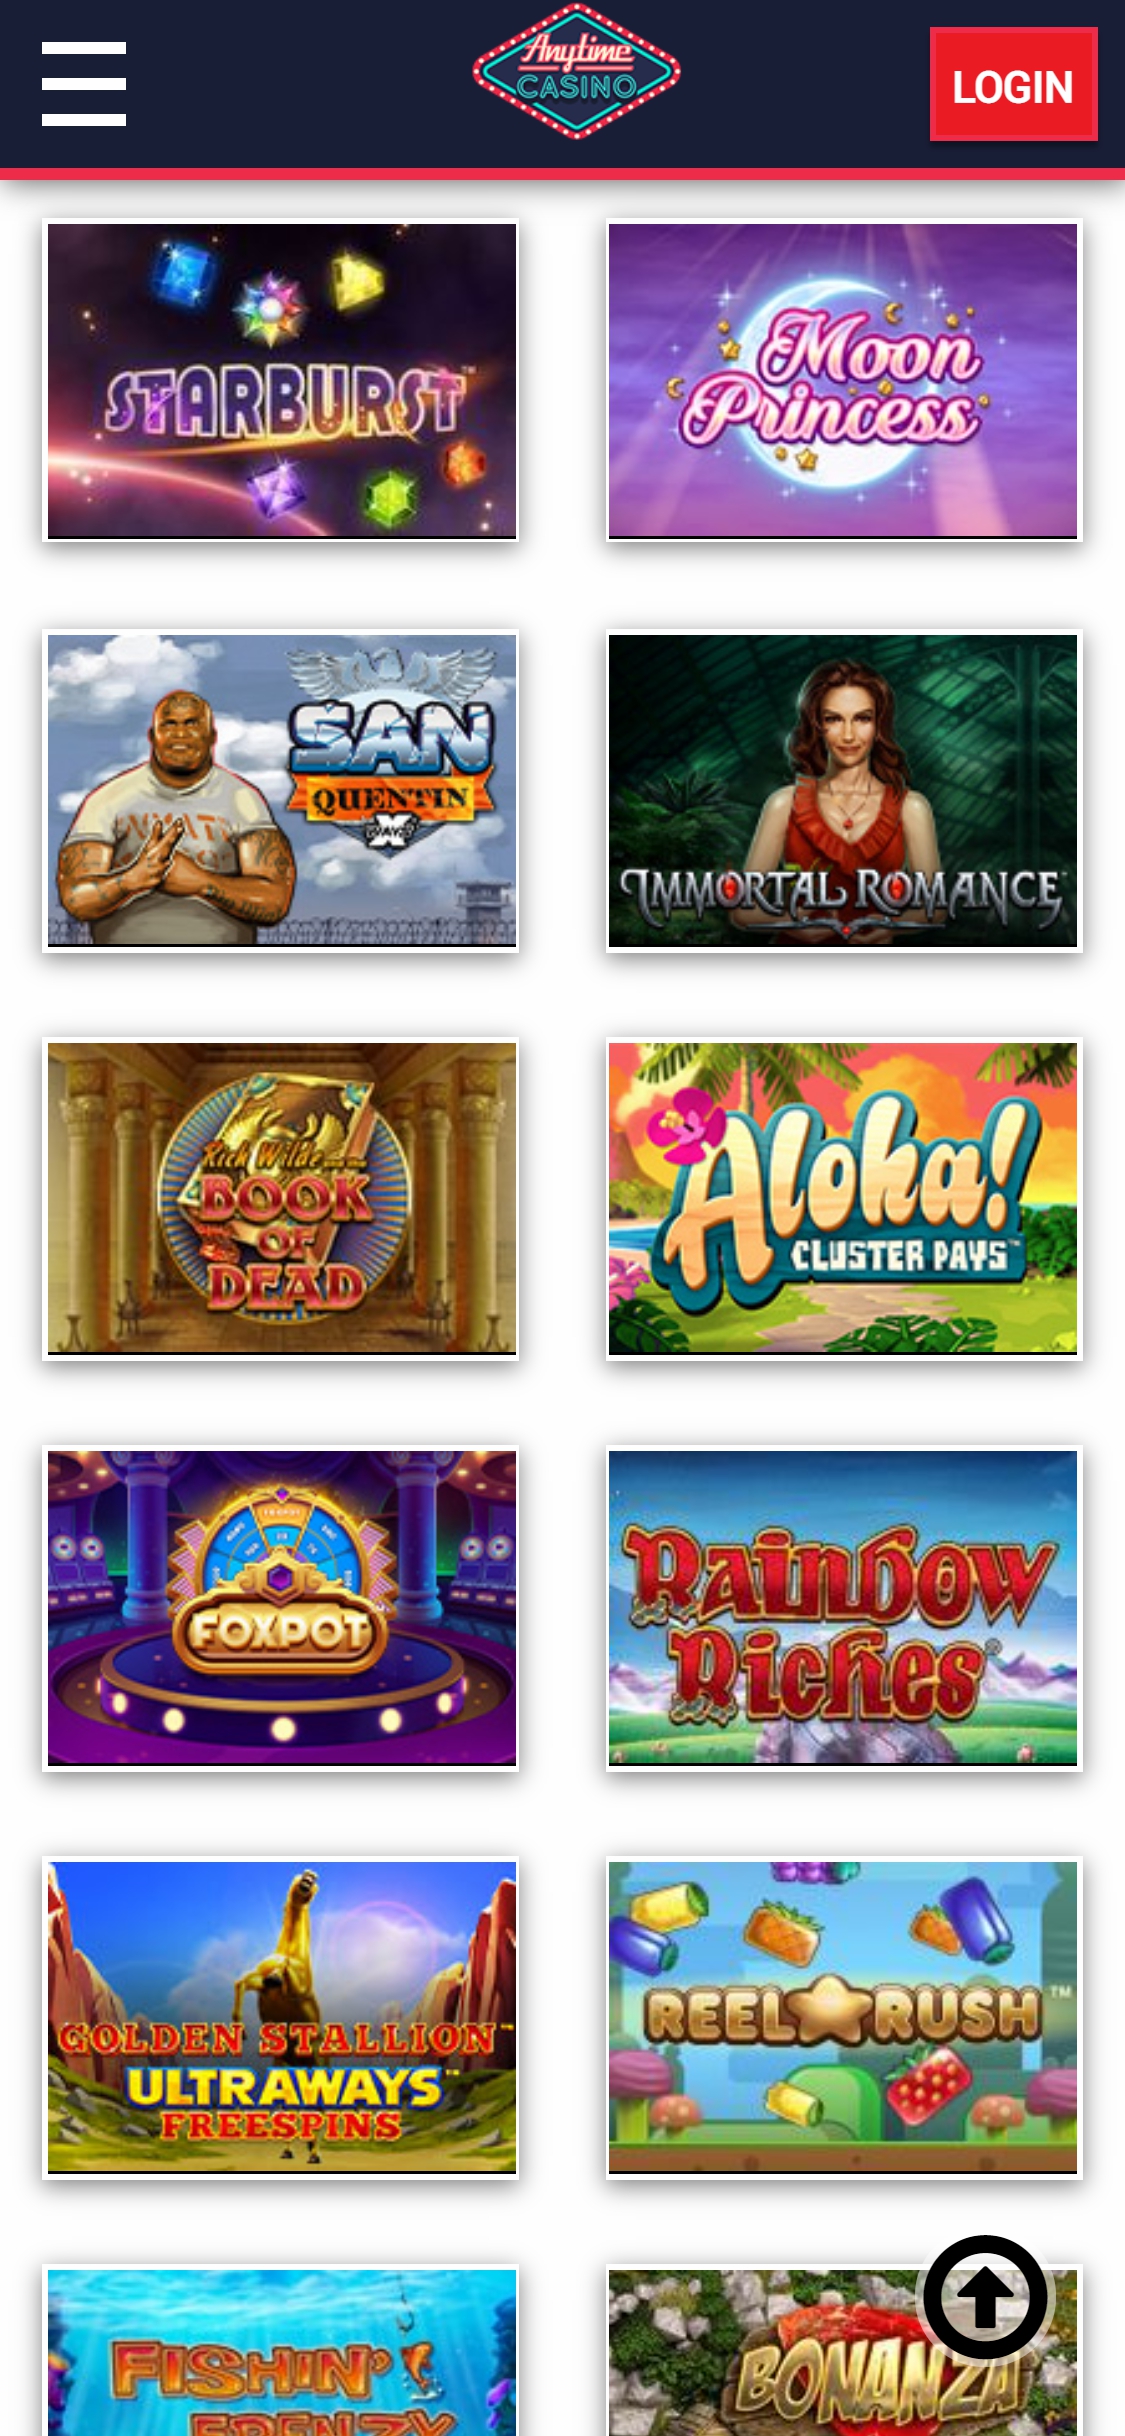 Anytime Casino Mobile Games Review